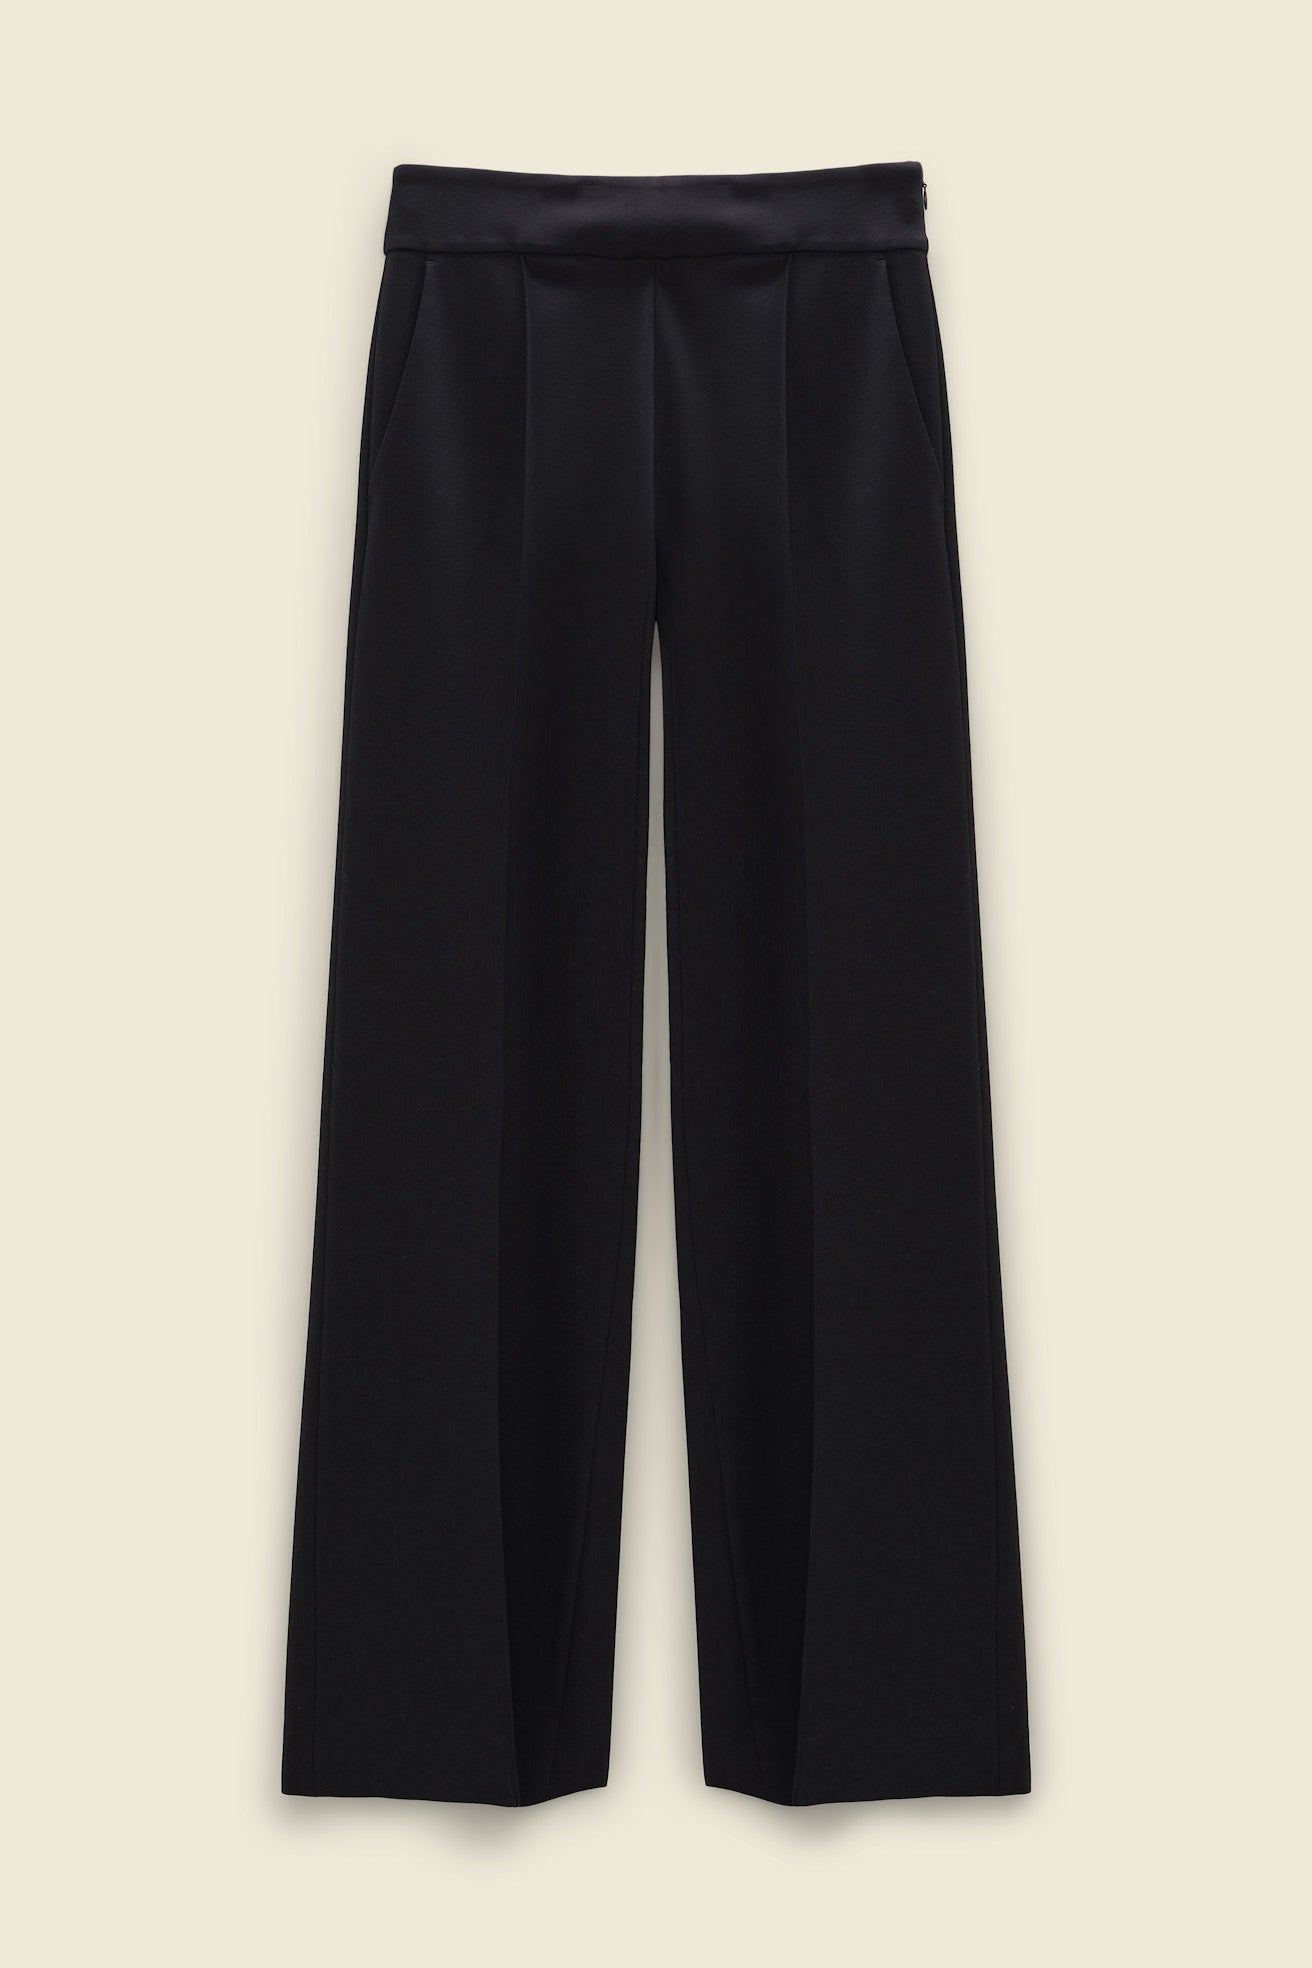 Emotional Essence pants by Dorothee Schumacher